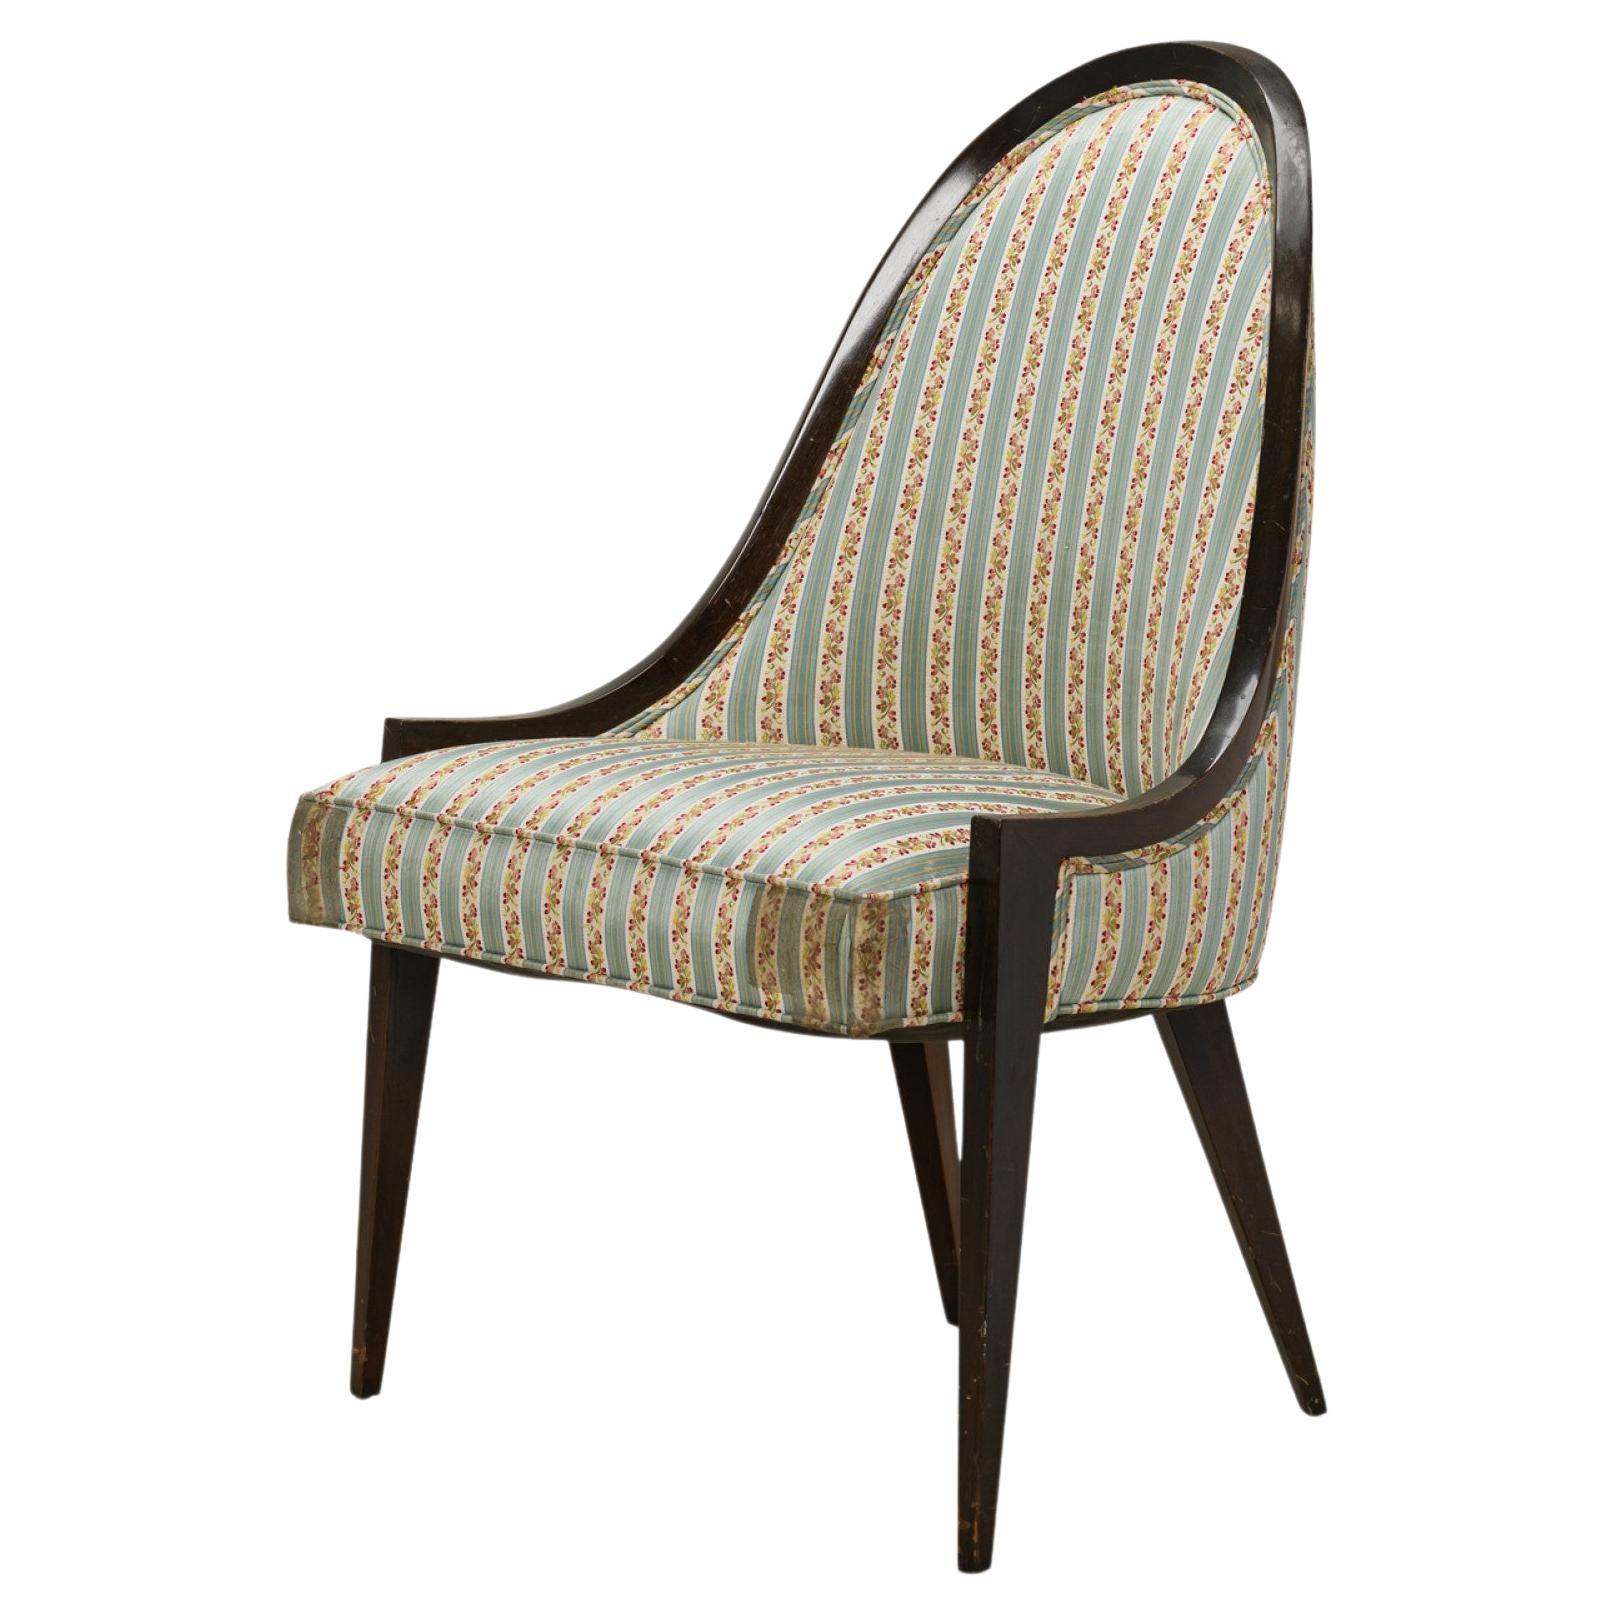 Harvey Probber 'Gondola' Mahogany and Striped Upholstery Pull Up Side Chair For Sale